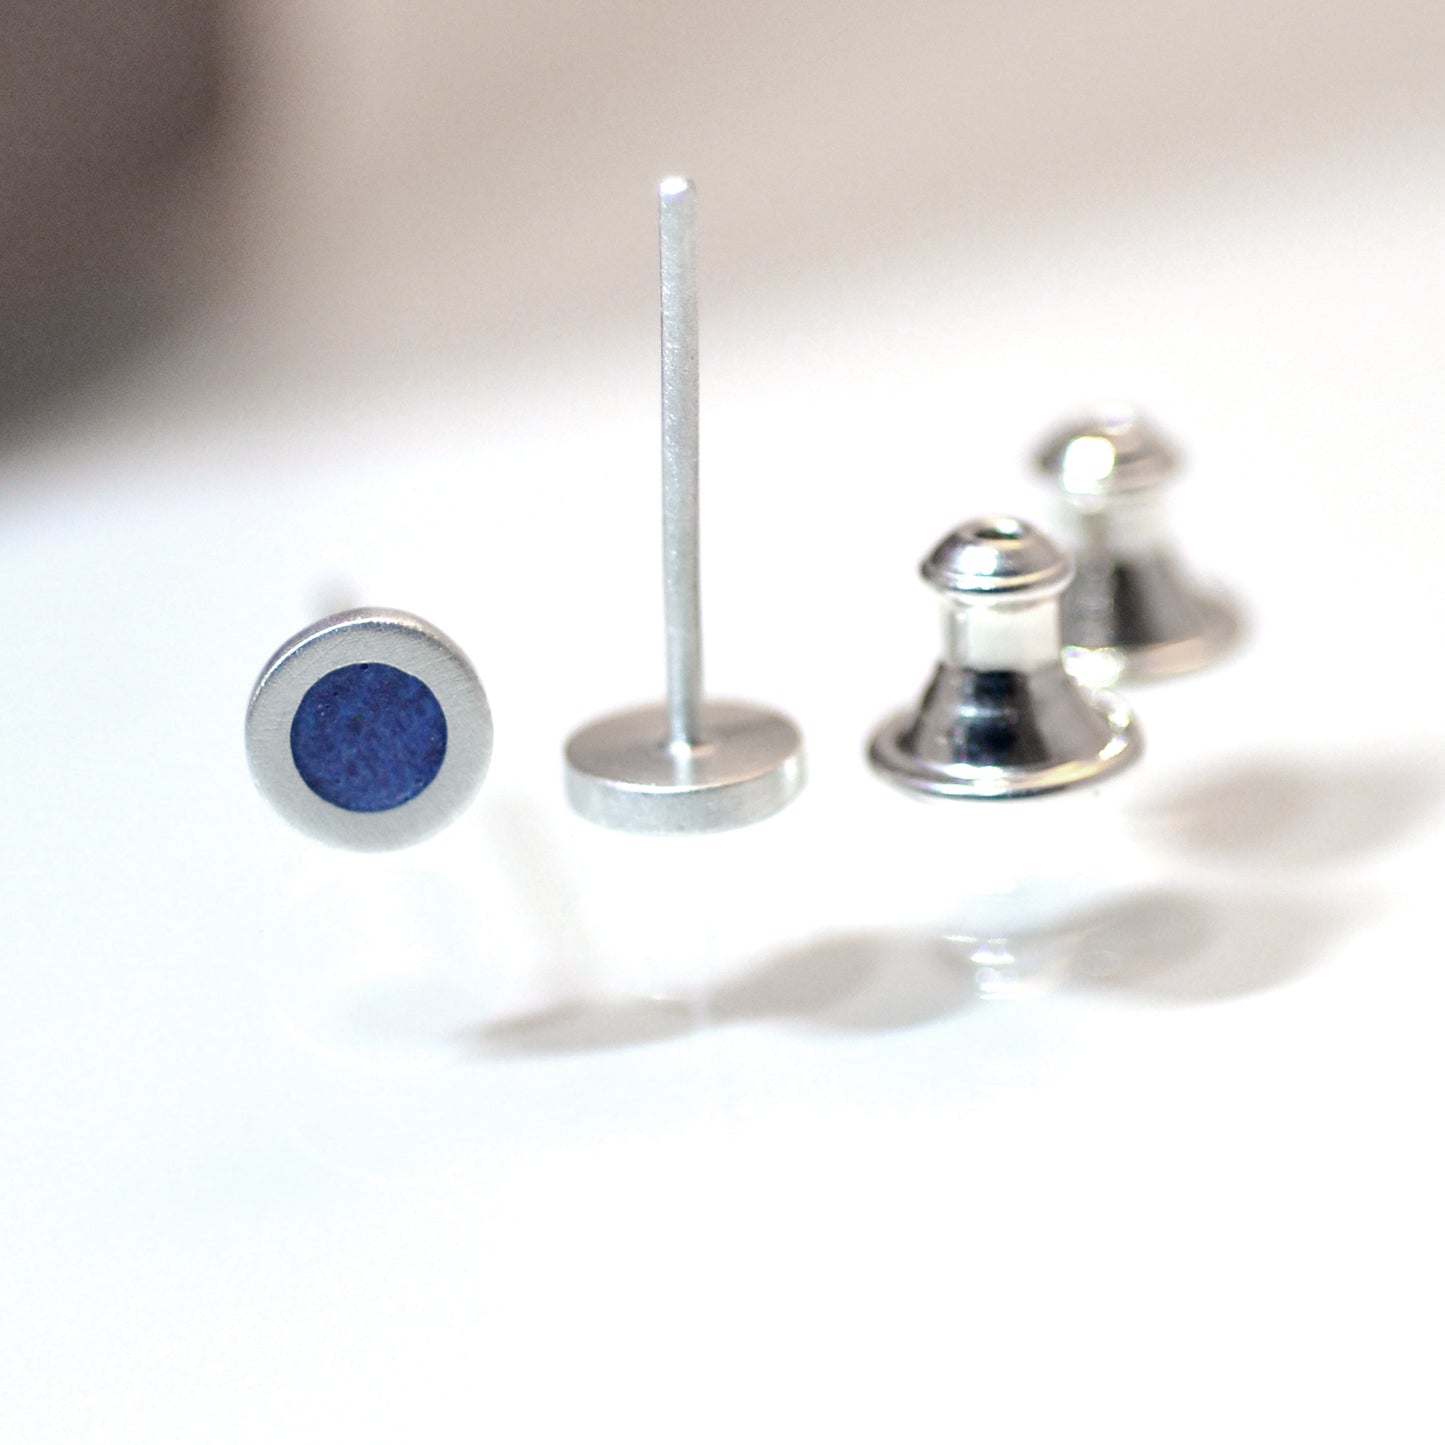 Tiny round sterling silver ear studs with Pale Violet Blue vitreous enamel